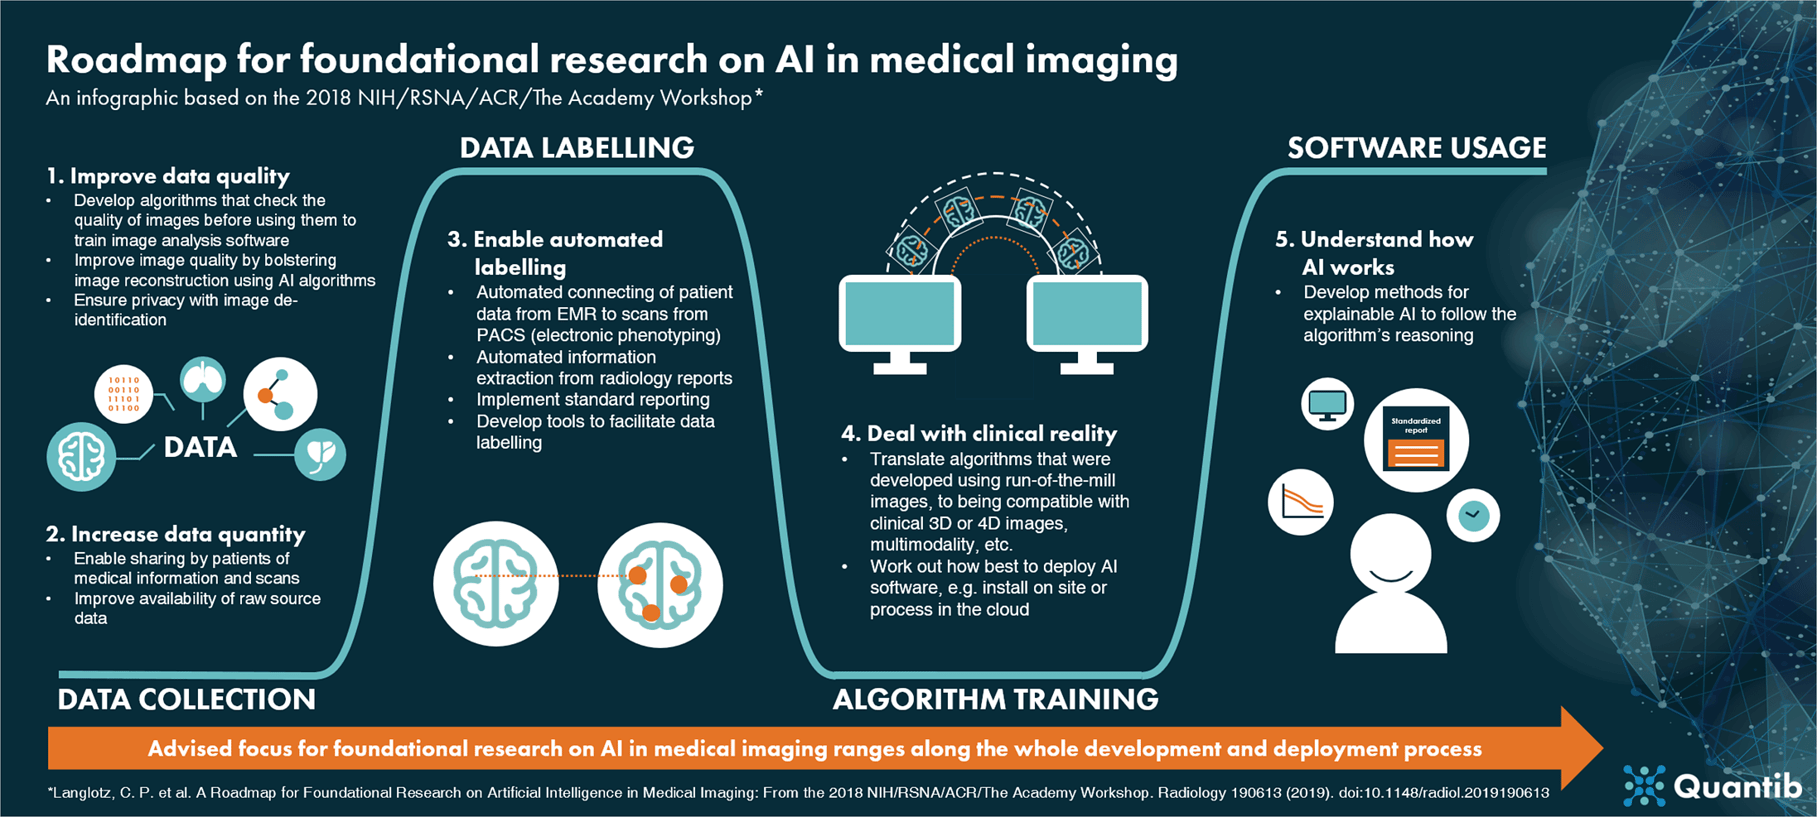 190426 - Infographic - Roadmap to AI in medical imaging (1)